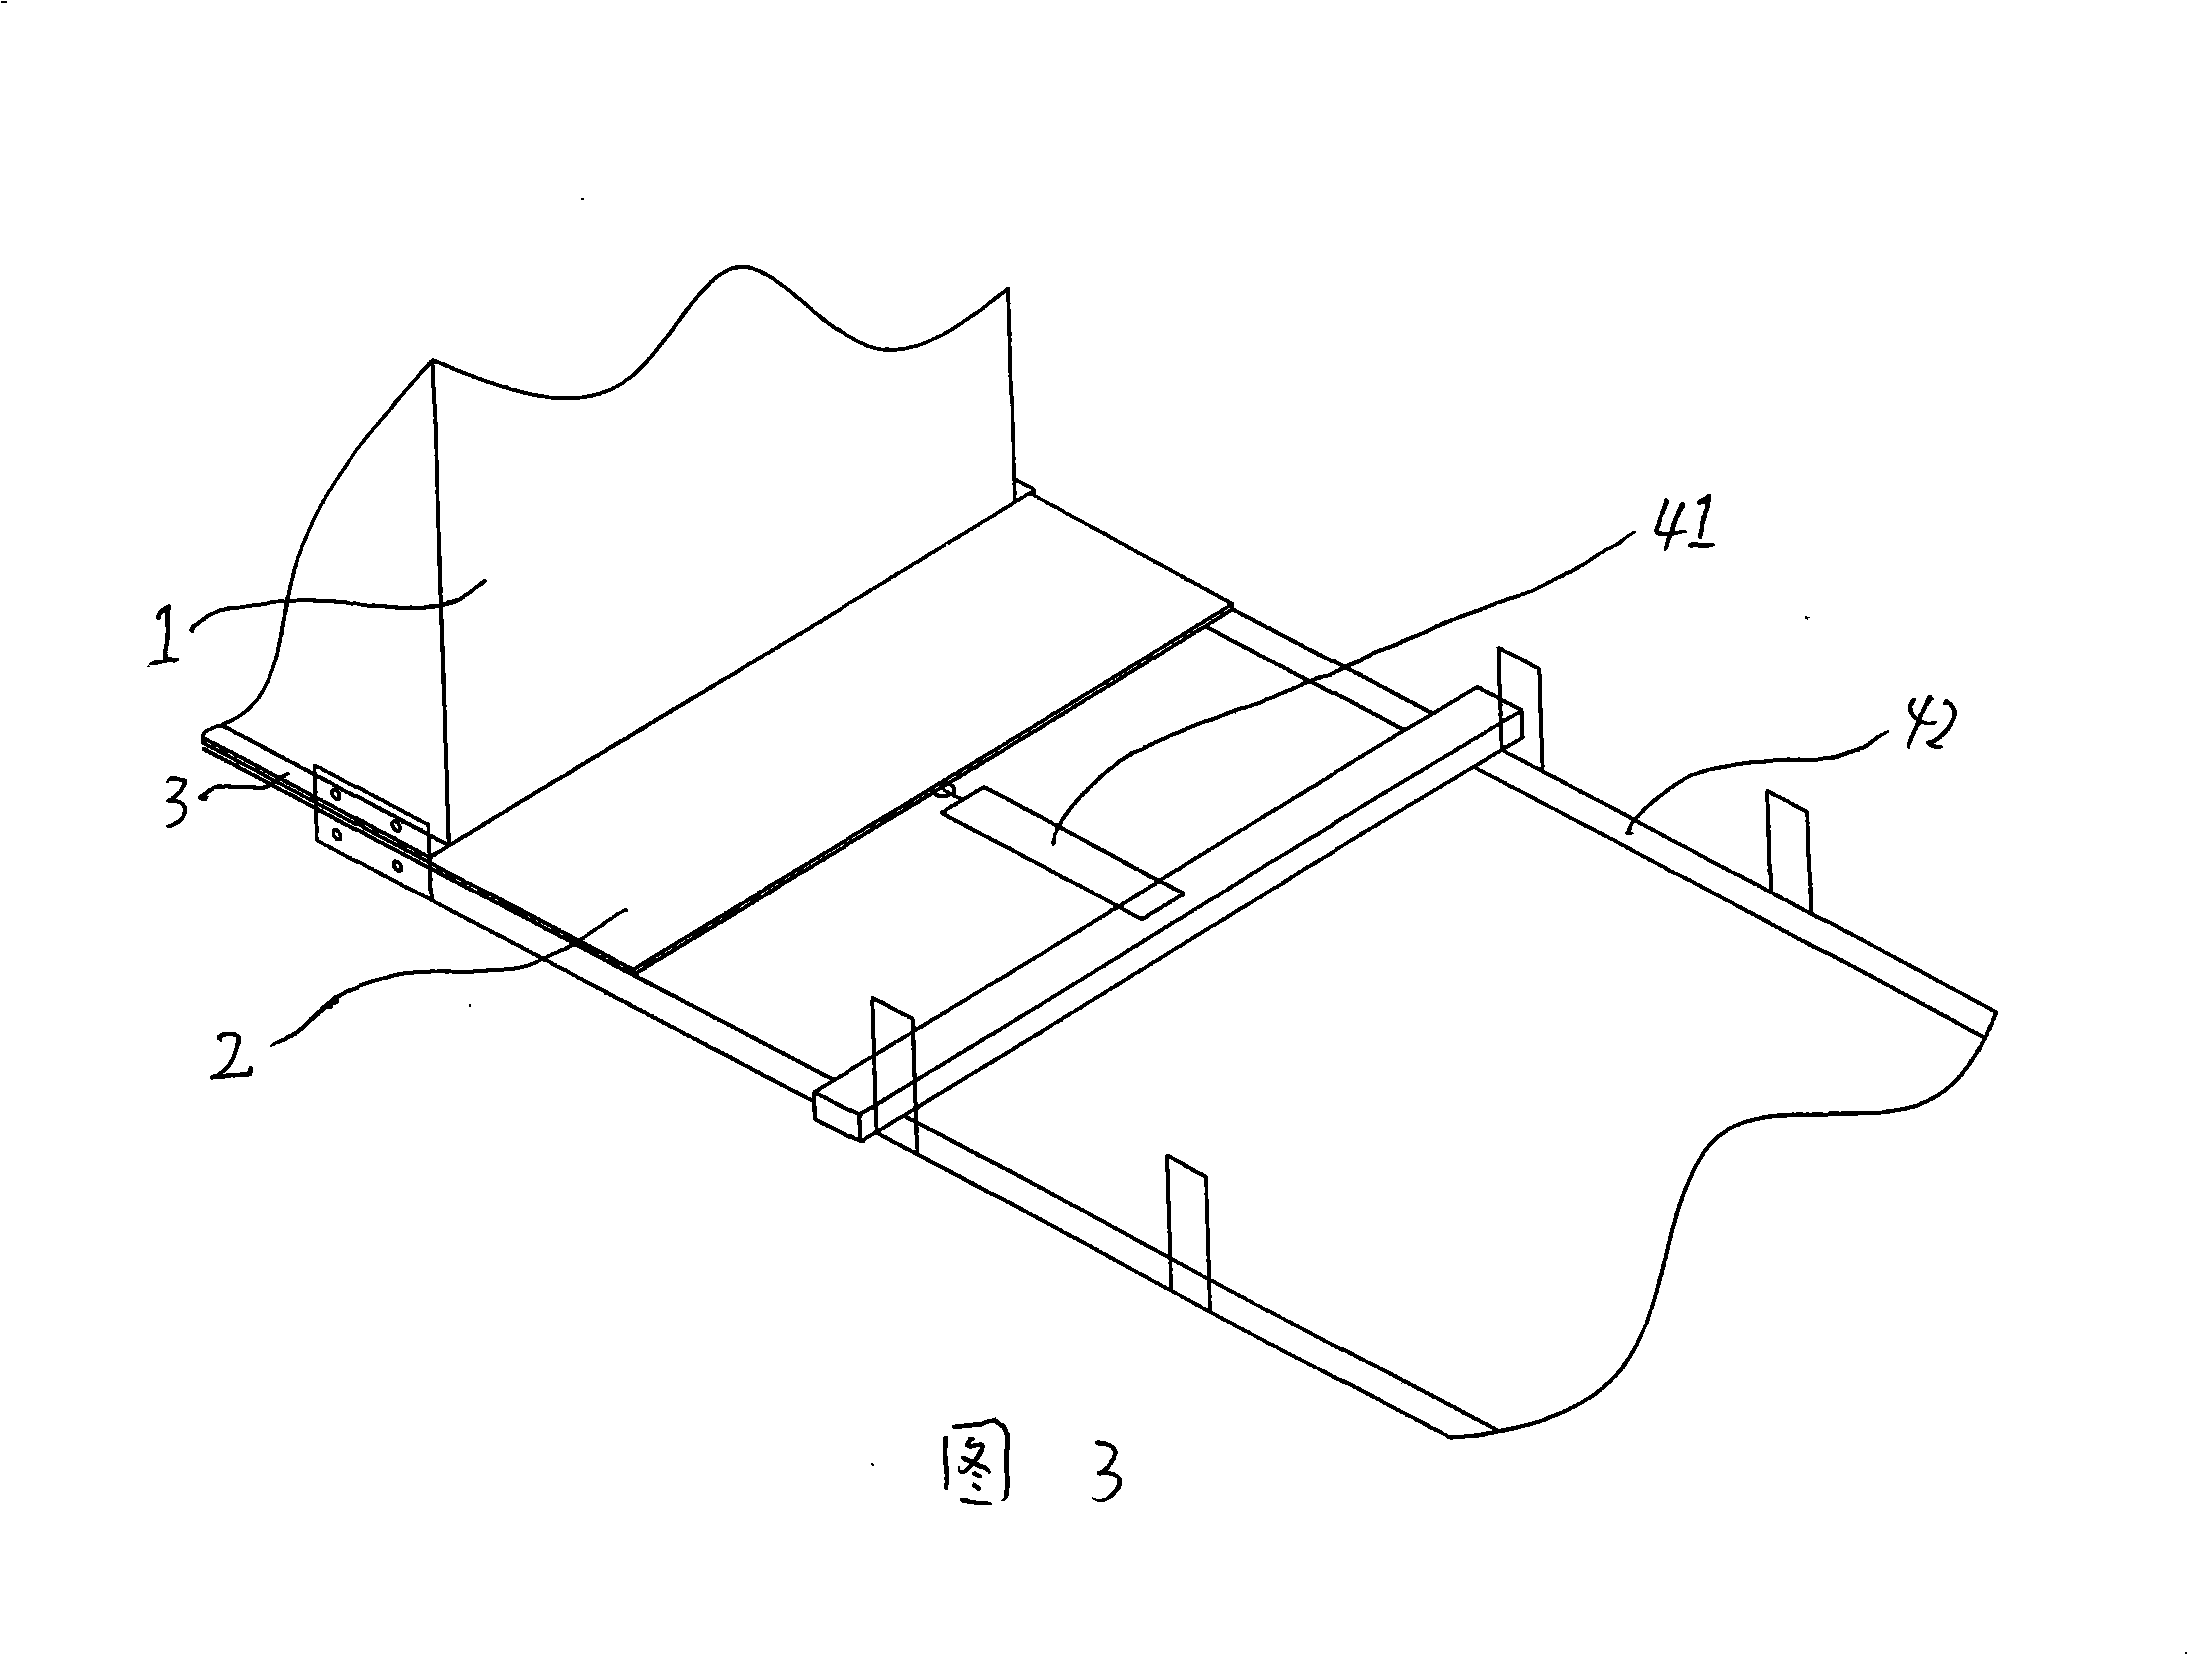 Land parcel transferring device for retaining soil construction and method for using the same to transfer land parcel